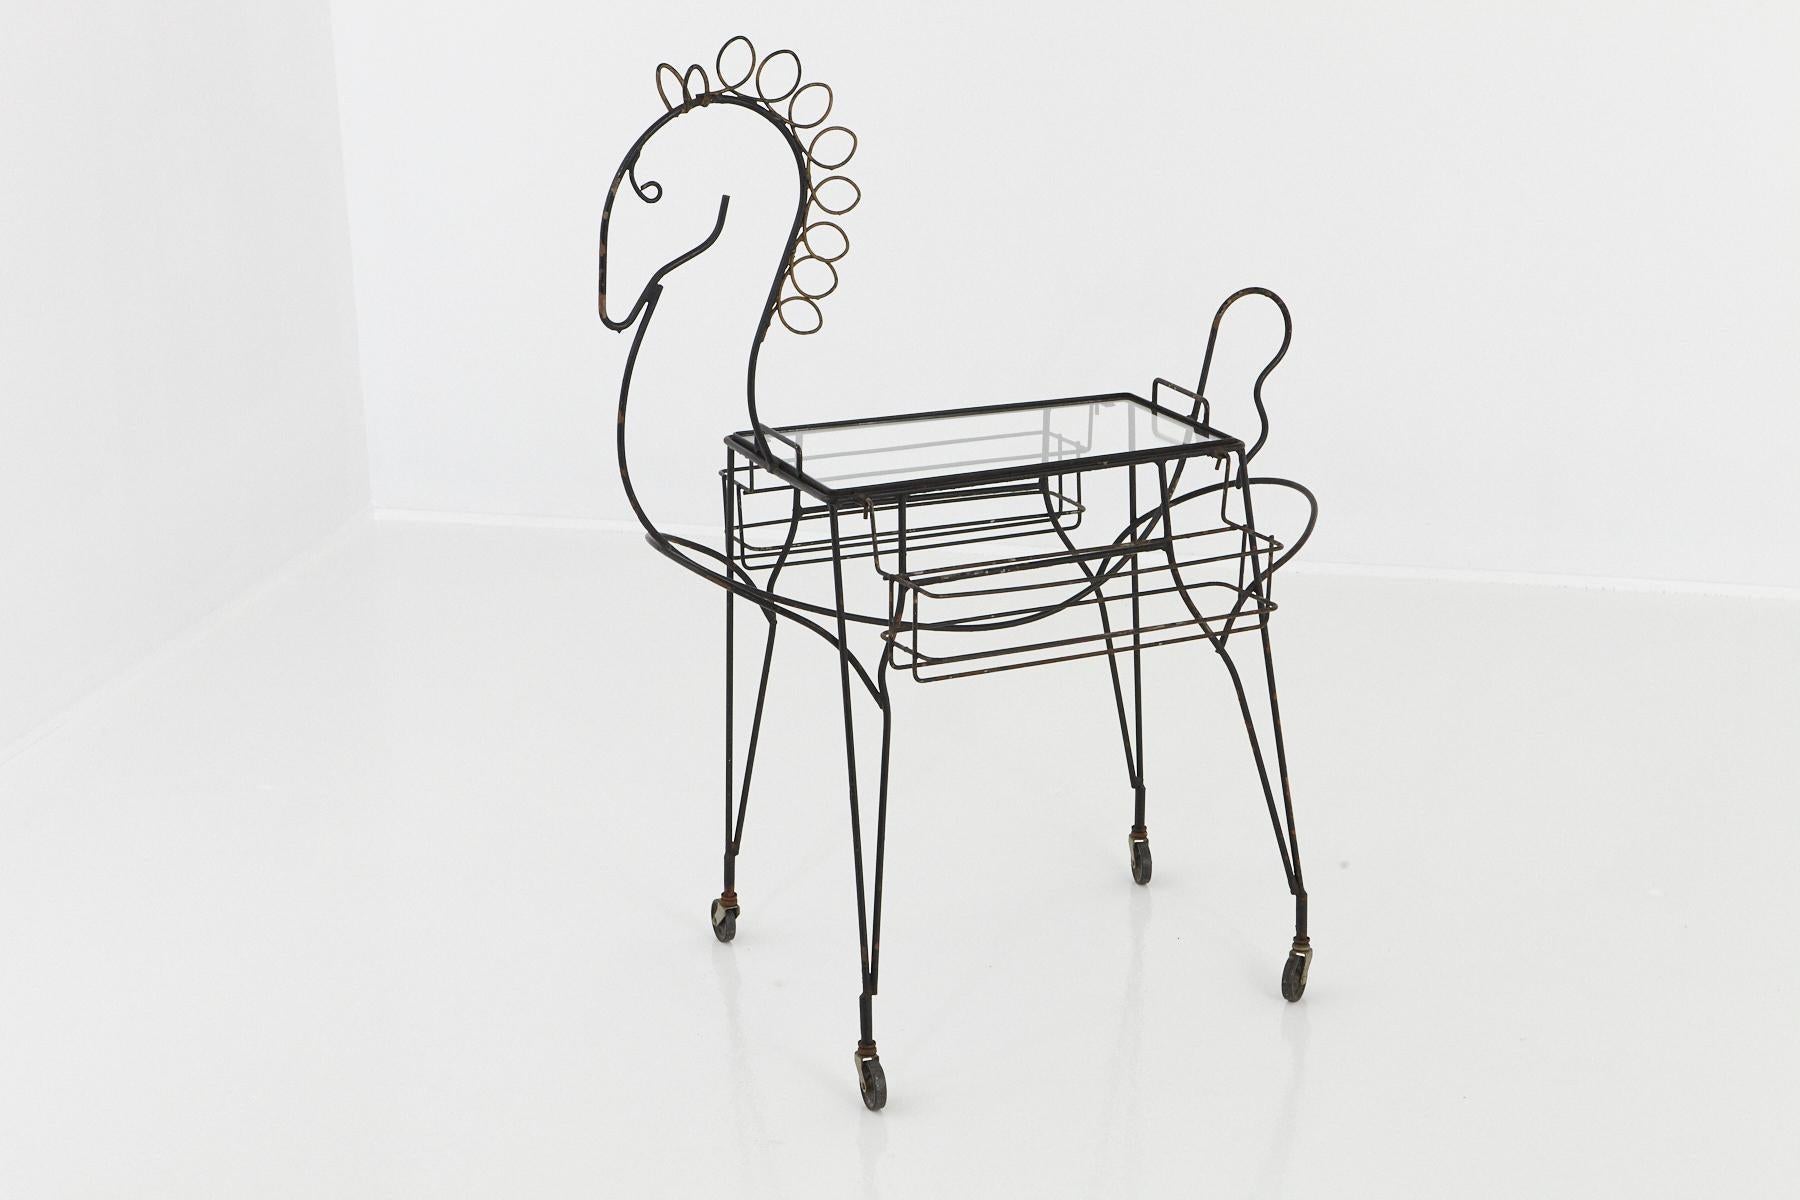 John Hollister Risley (1919-2002) black wrought iron bar cart in the design of a horse, complete with two removable bottle holders on each side and a removable glass tray on casters, circa 1955.
The 